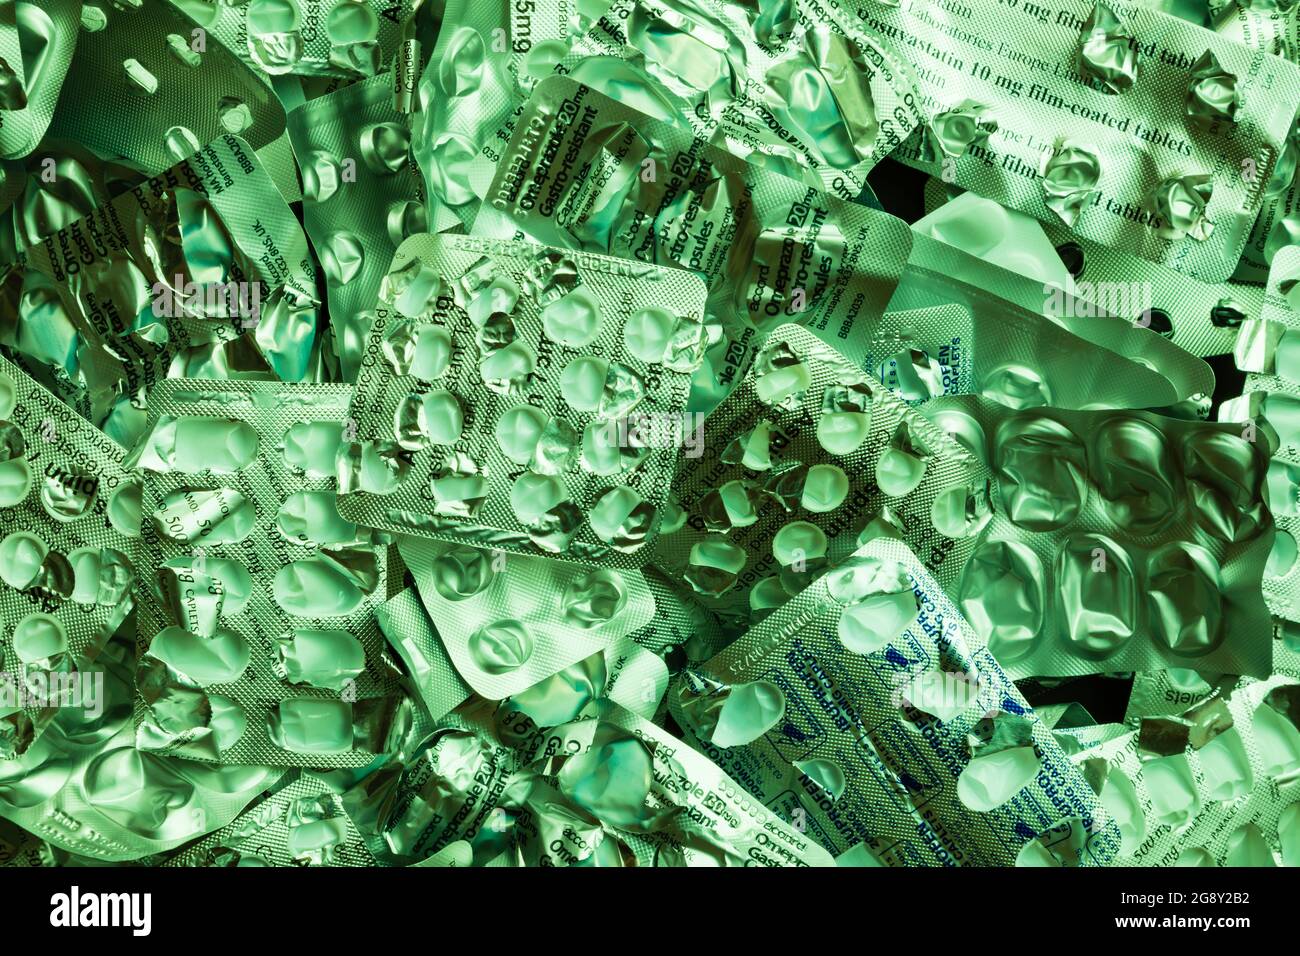 Green tinted Waste Prescription medication table blister packs awaiting recycling. Stock Photo